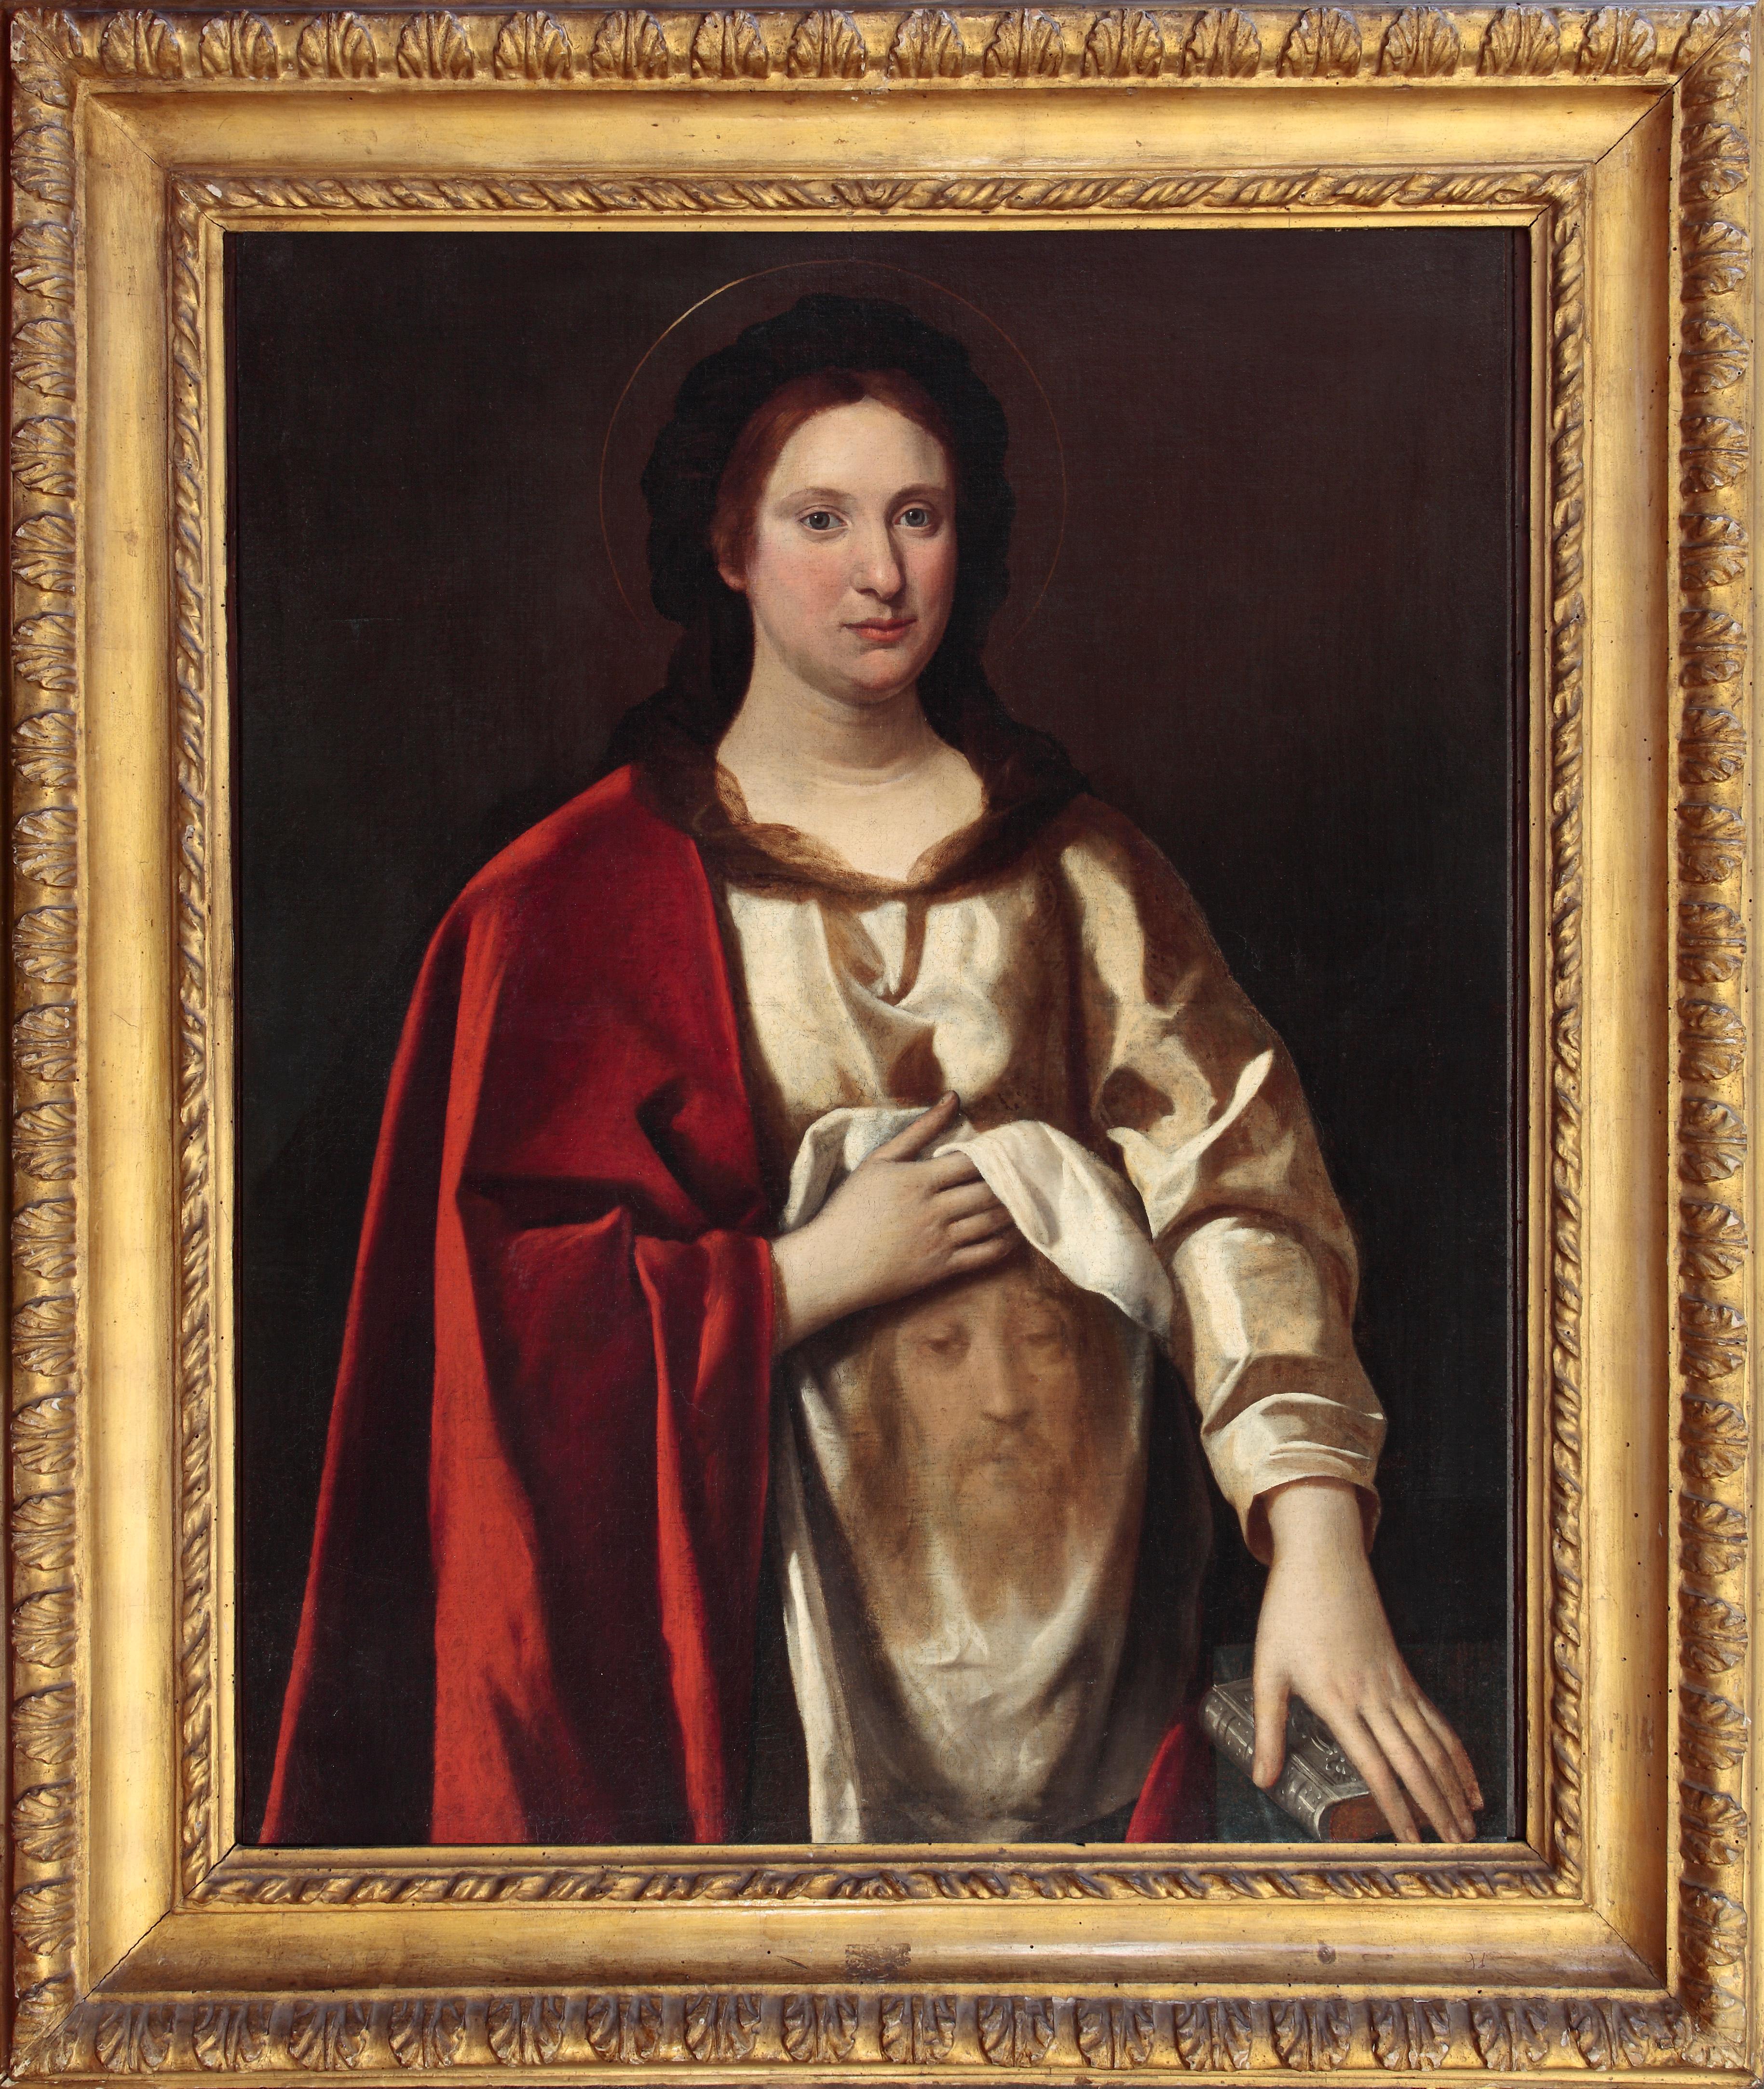 Imperiale Gramatica Figurative Painting - 17th Century By Gramatica Cryptoportrait of a lady as The Veronica Oil on Canvas